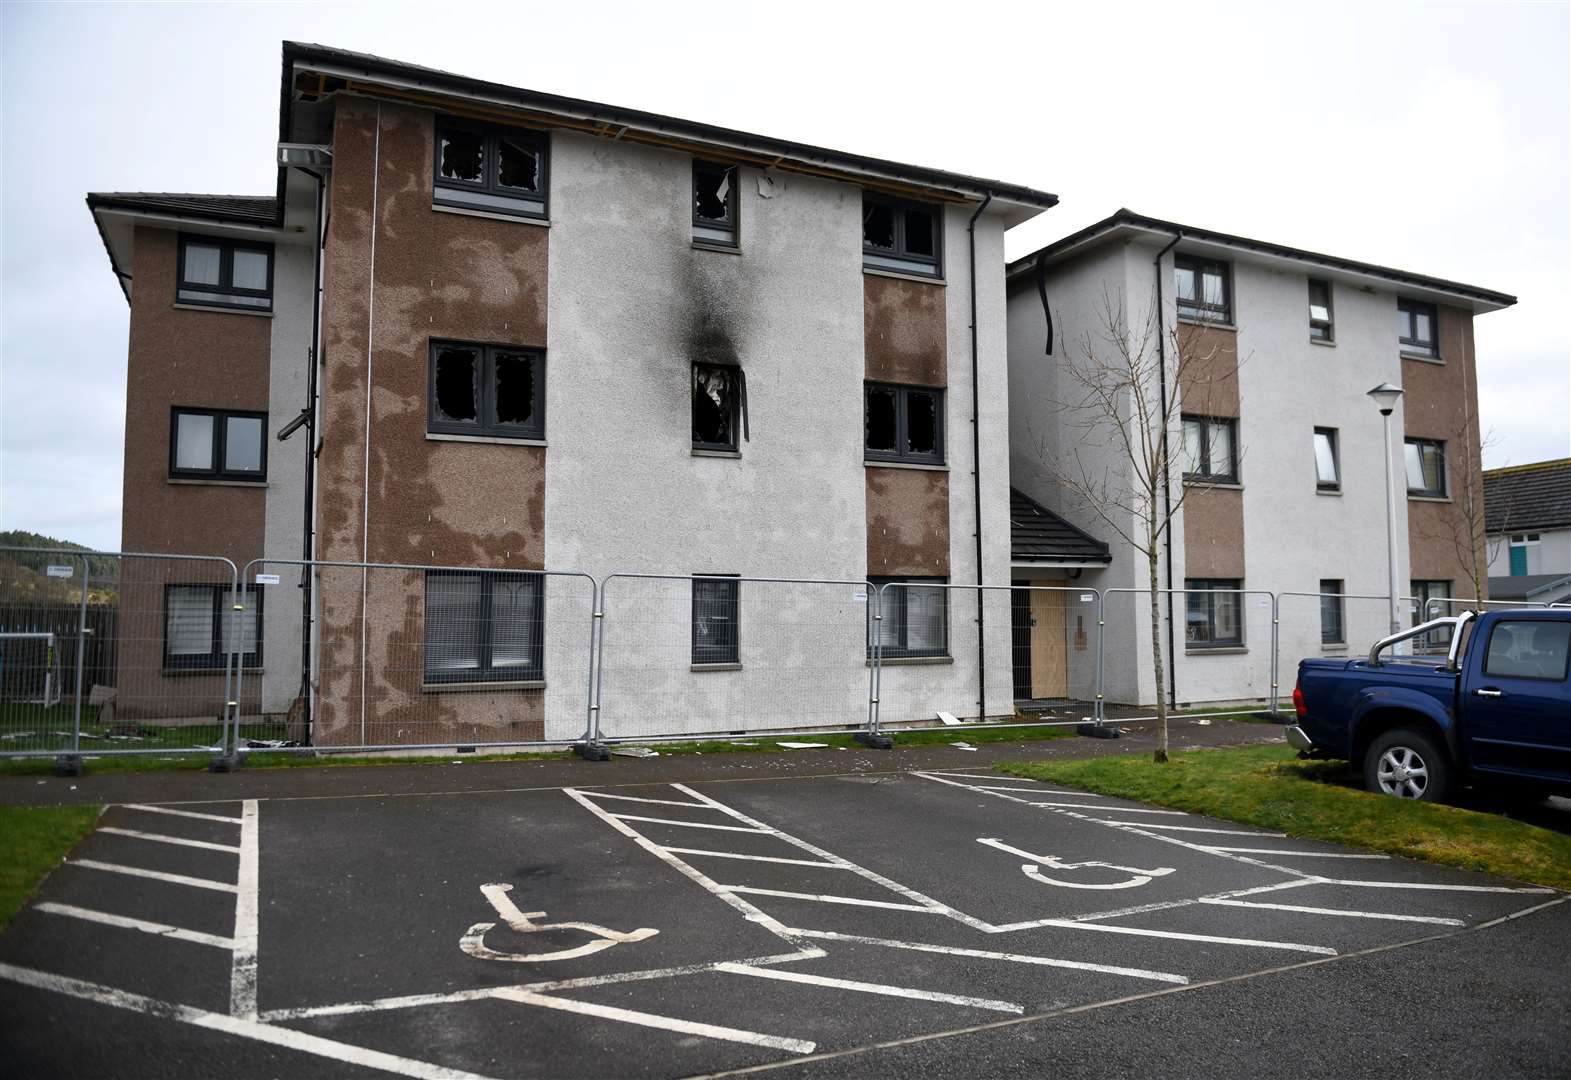 Flats in the city's Polvanie View have been left gutted after an incident at the end of March. Picture: James Mackenzie